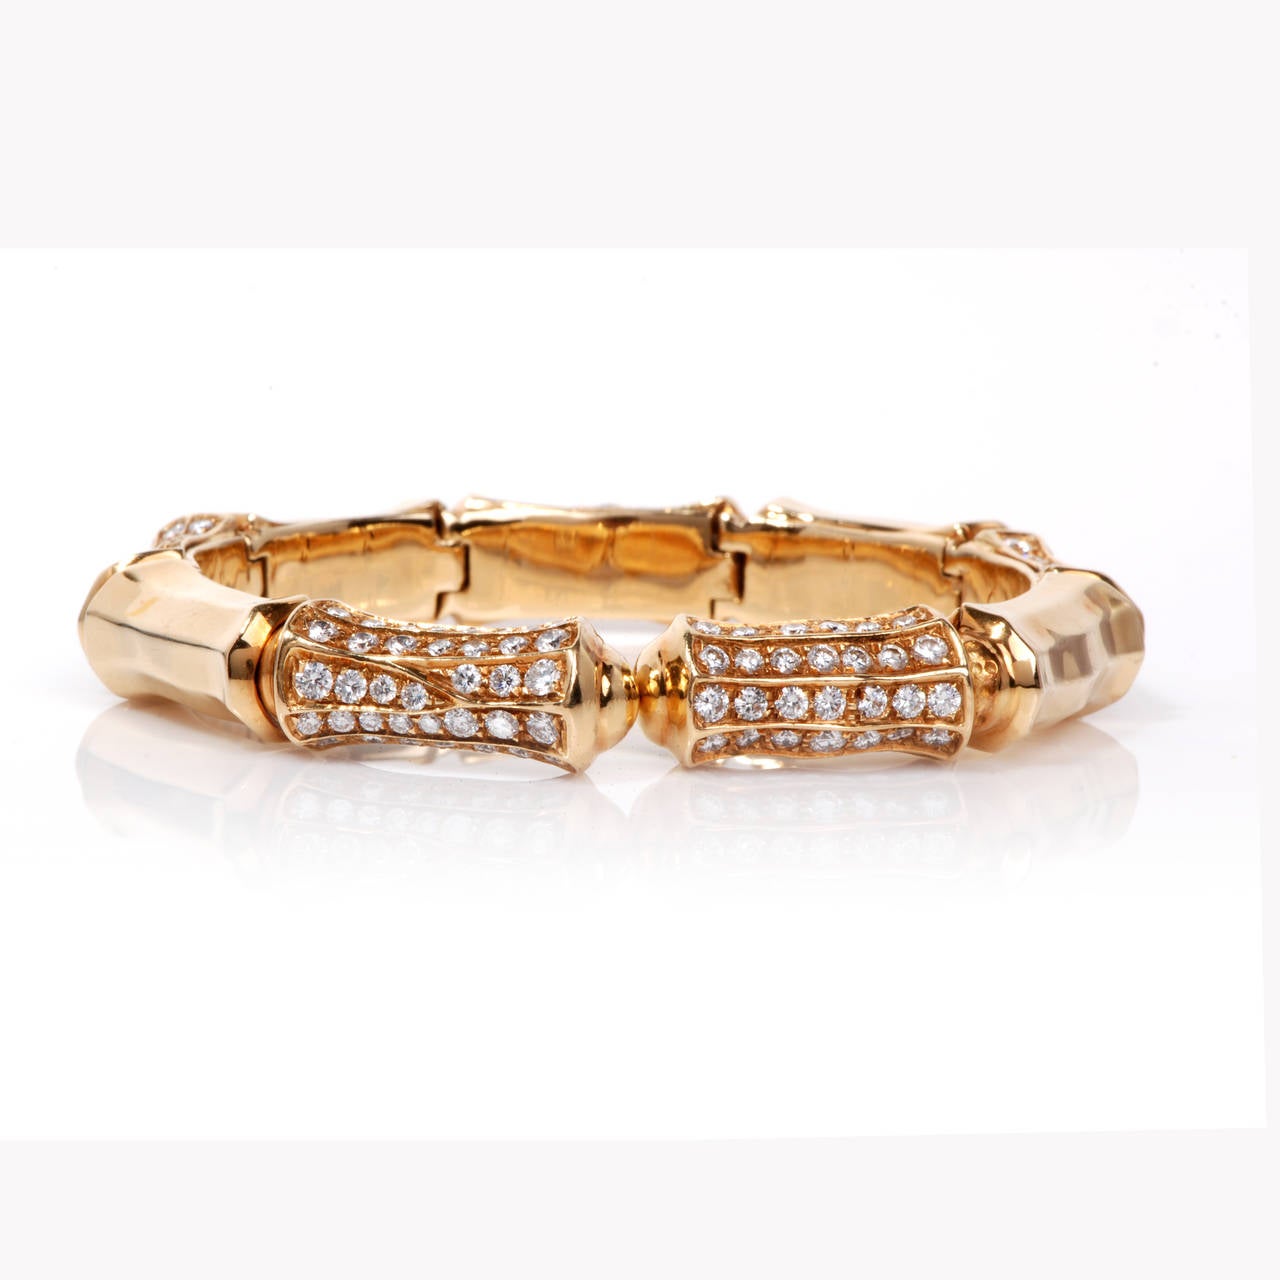 This gorgeous vintage bamboo design link bracelet is crafted in solid 18k yellow gold. The bracelet is accented with some 200 genuine round cut diamonds approx. 11.00ct, F-G color and VS1 clarity. The Bangle cuff bracelet provides a secure clip